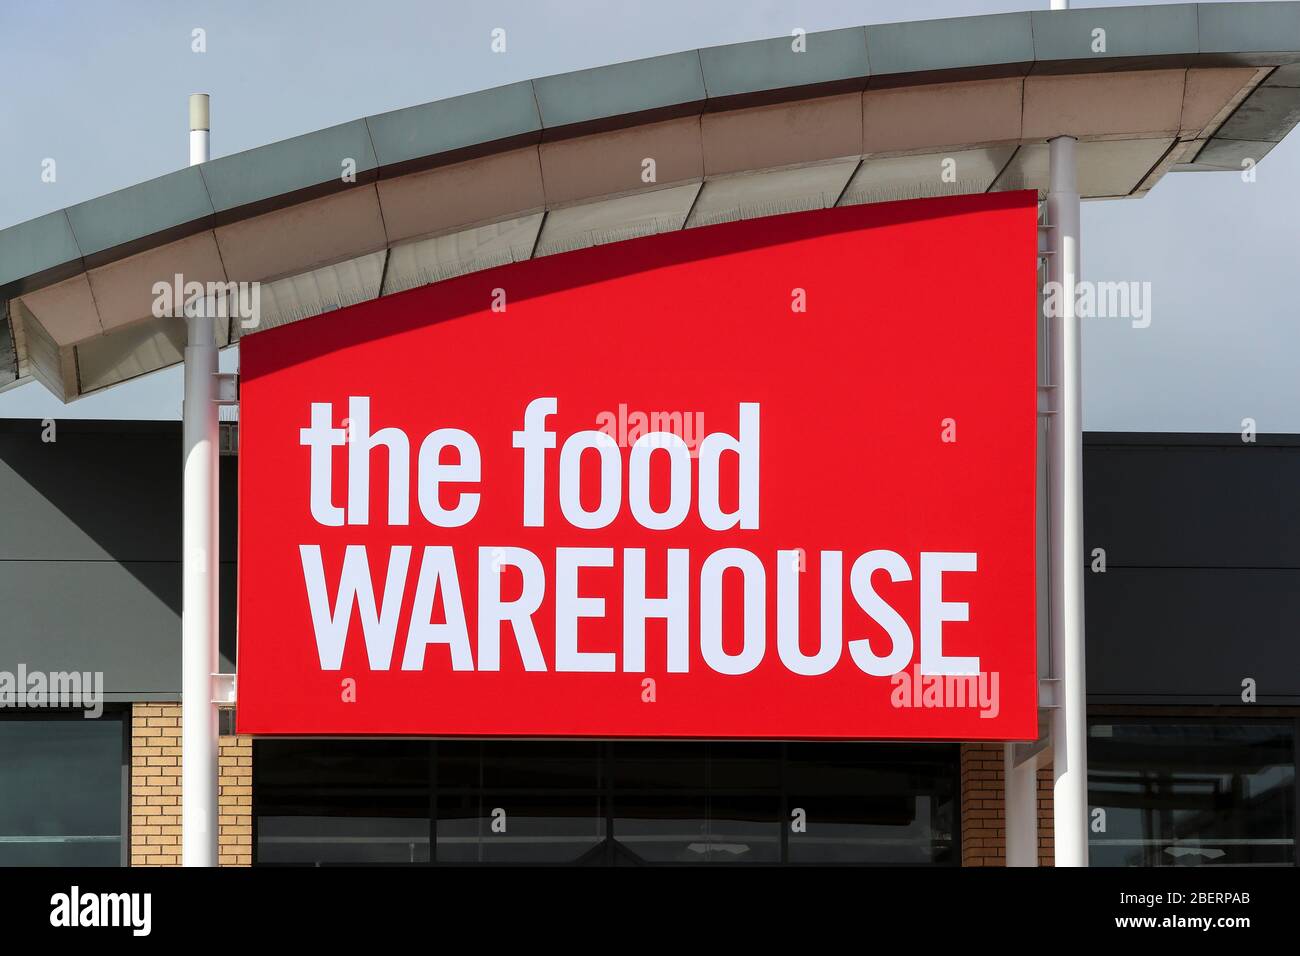 The food warehouse, company logo, above a shopping outlet selling groceries and home goods, Kilmarnock, Scotland Stock Photo